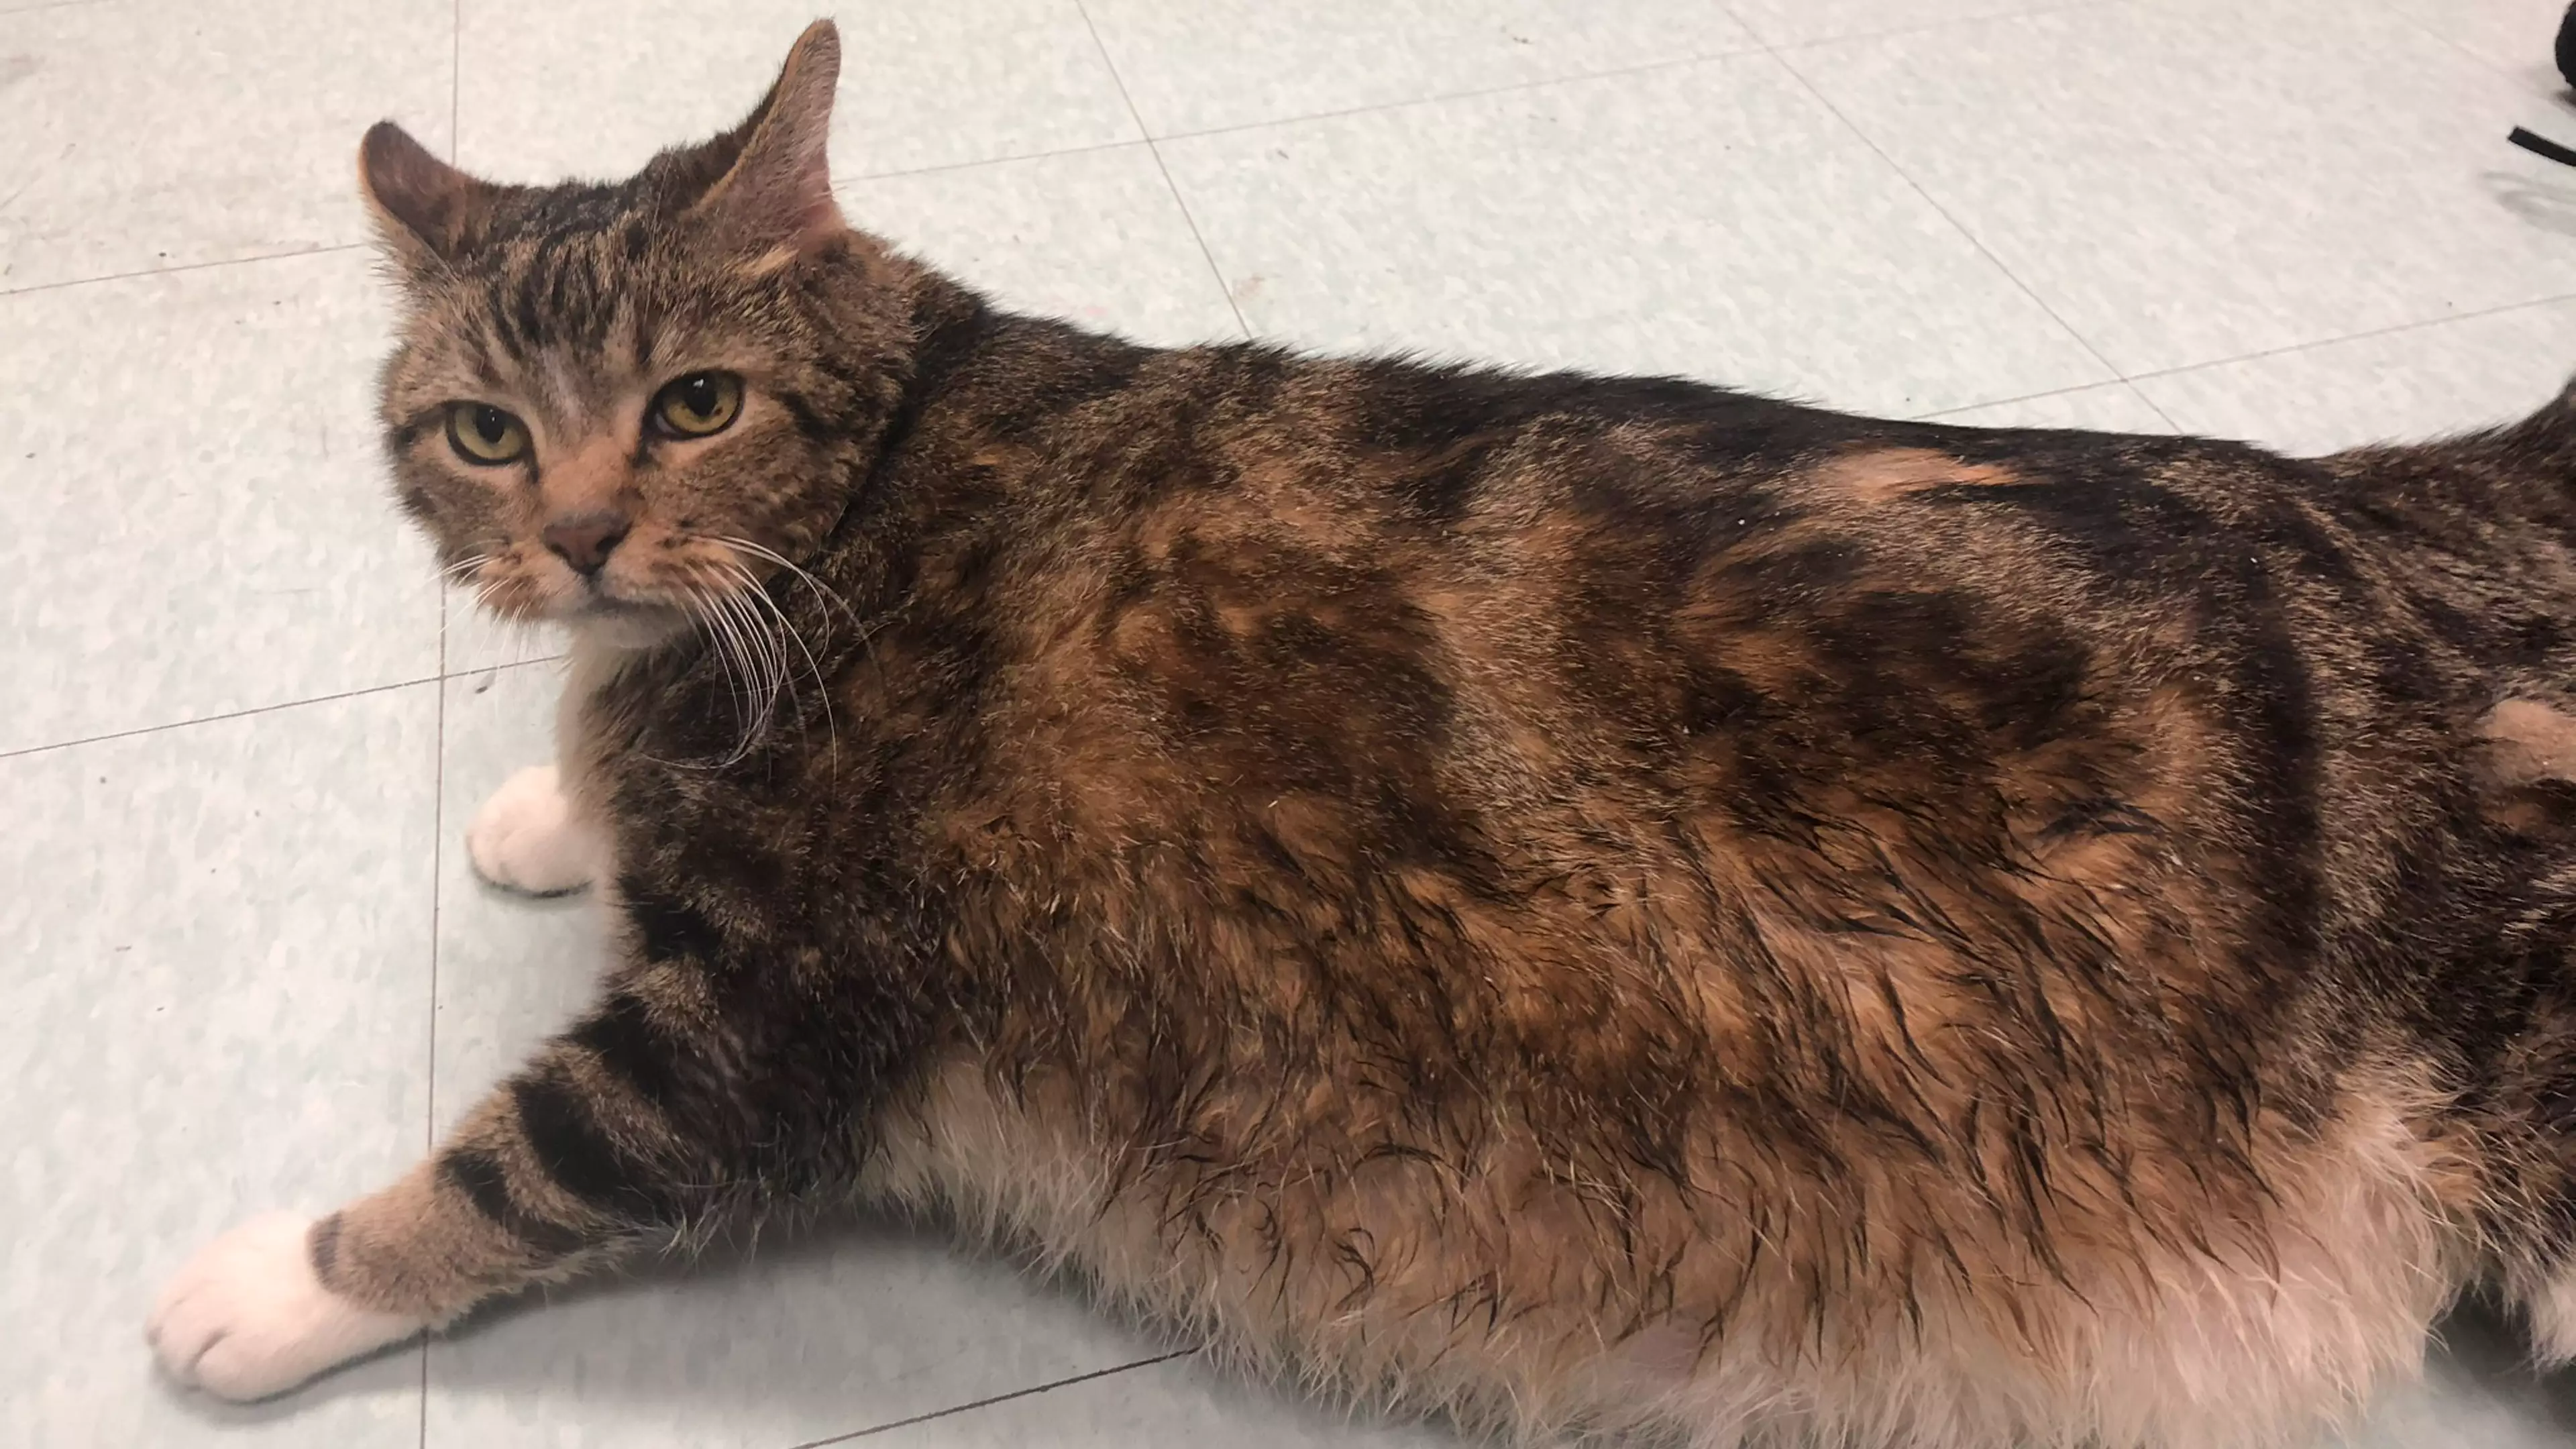 Giant Chonky Cat Called Lasagne Dumped At Animal Shelter Finds Fur-Ever Home